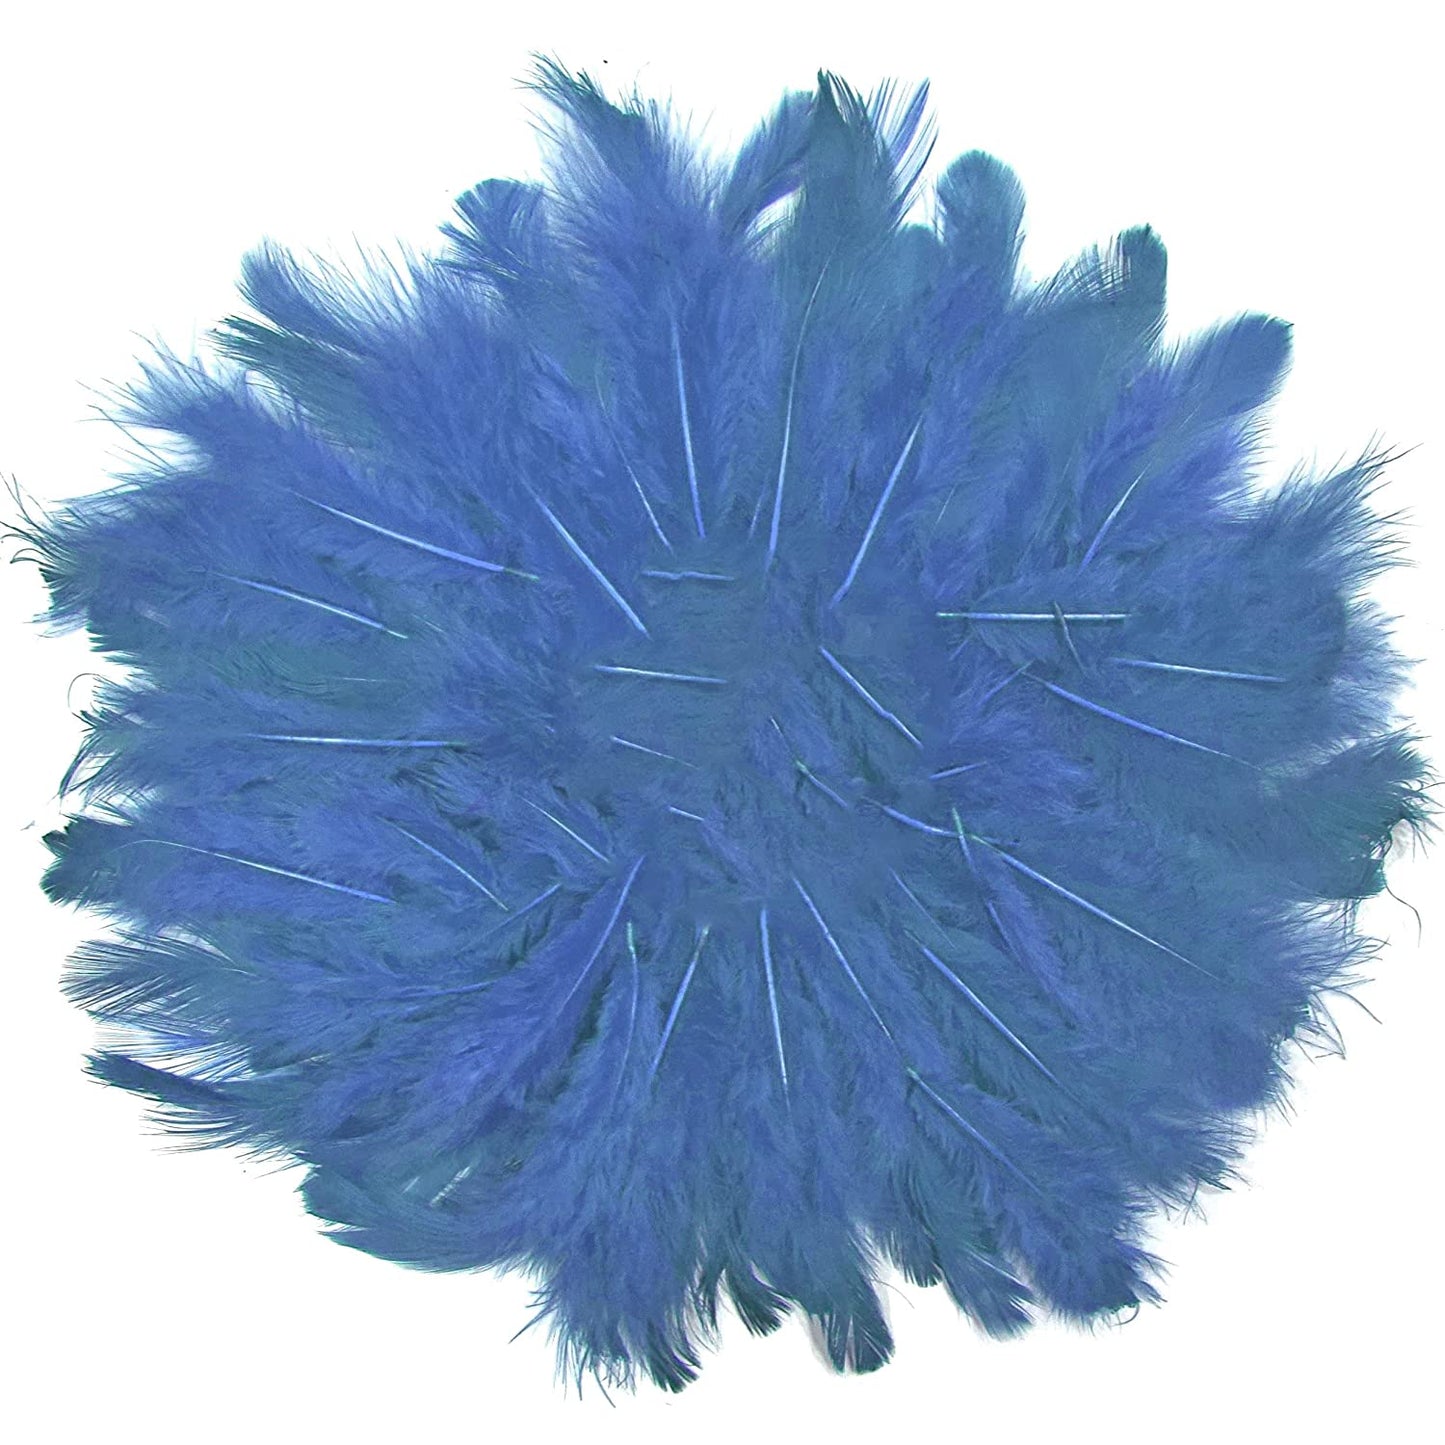 Naturally Dyed Feathers Pack of 80 Pcs